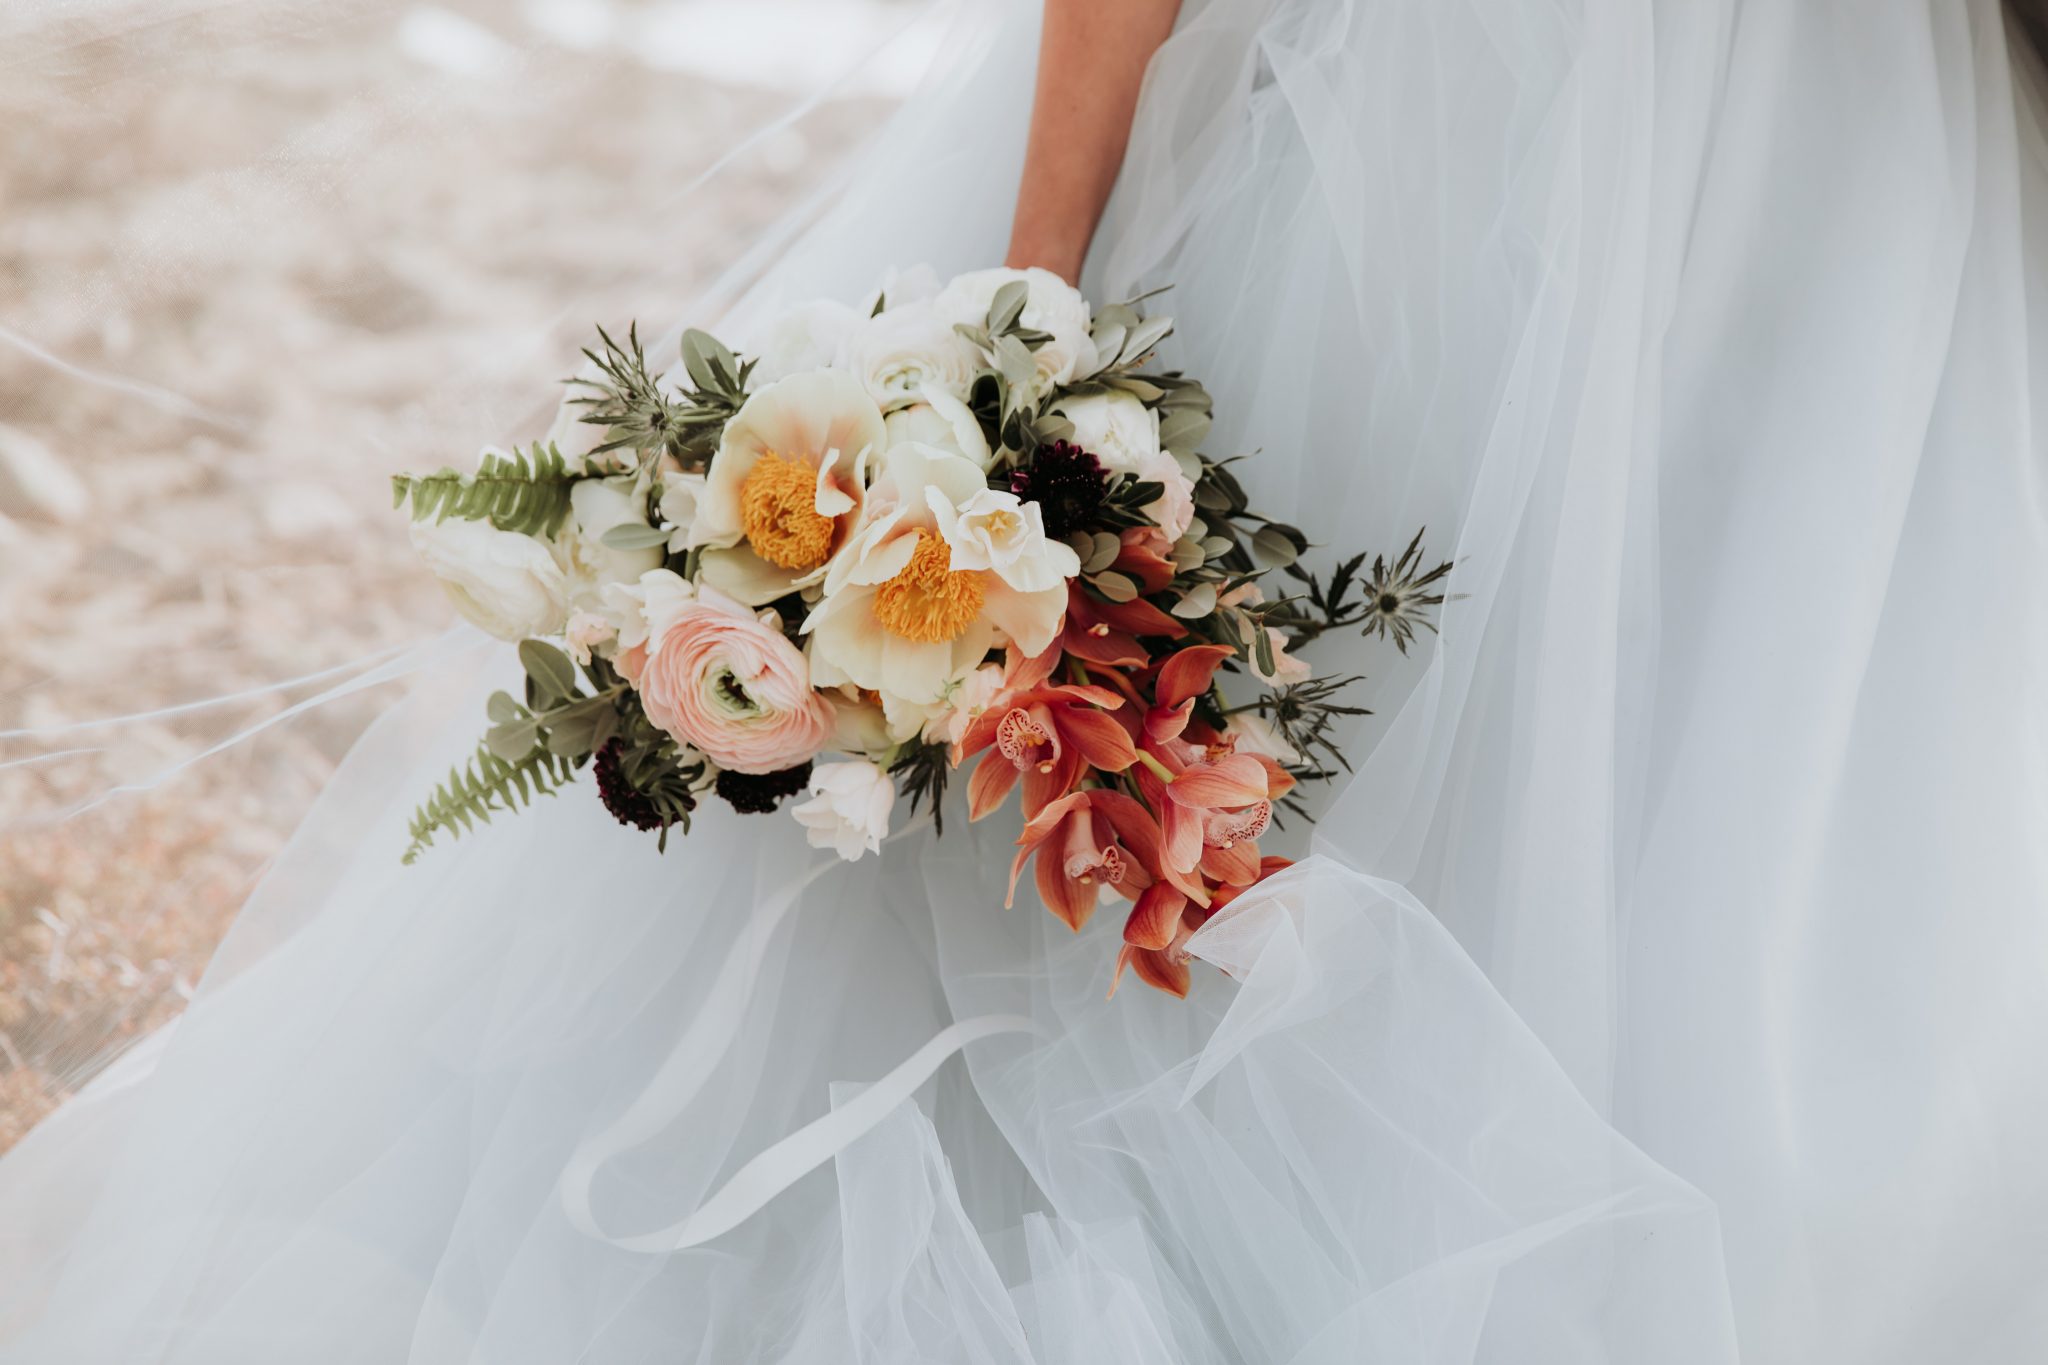 Coral and Blush Bridal Bouquet Mountainous Adventure Session featuring Contemporary Attire & Alberta Views Featured on Bronte Bridë